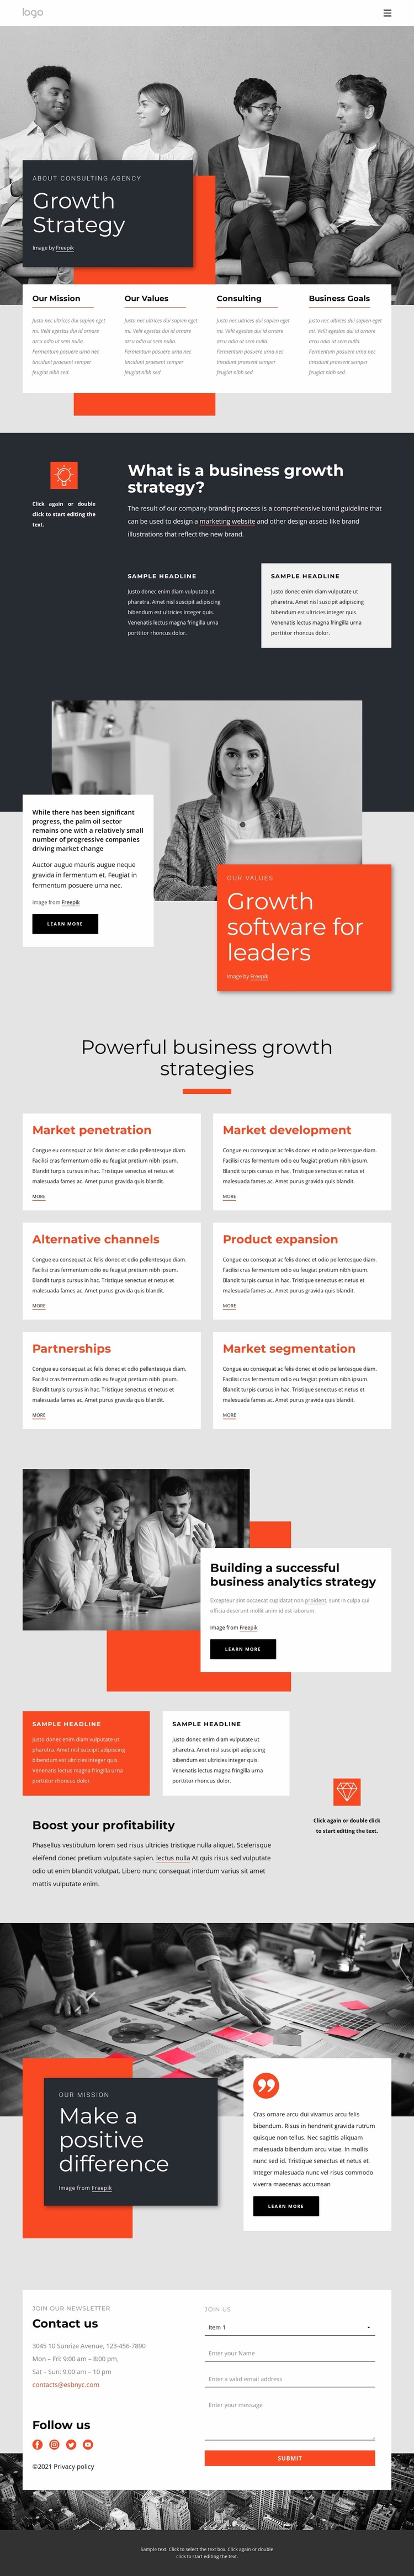 Growth strategy consultants Landing Page